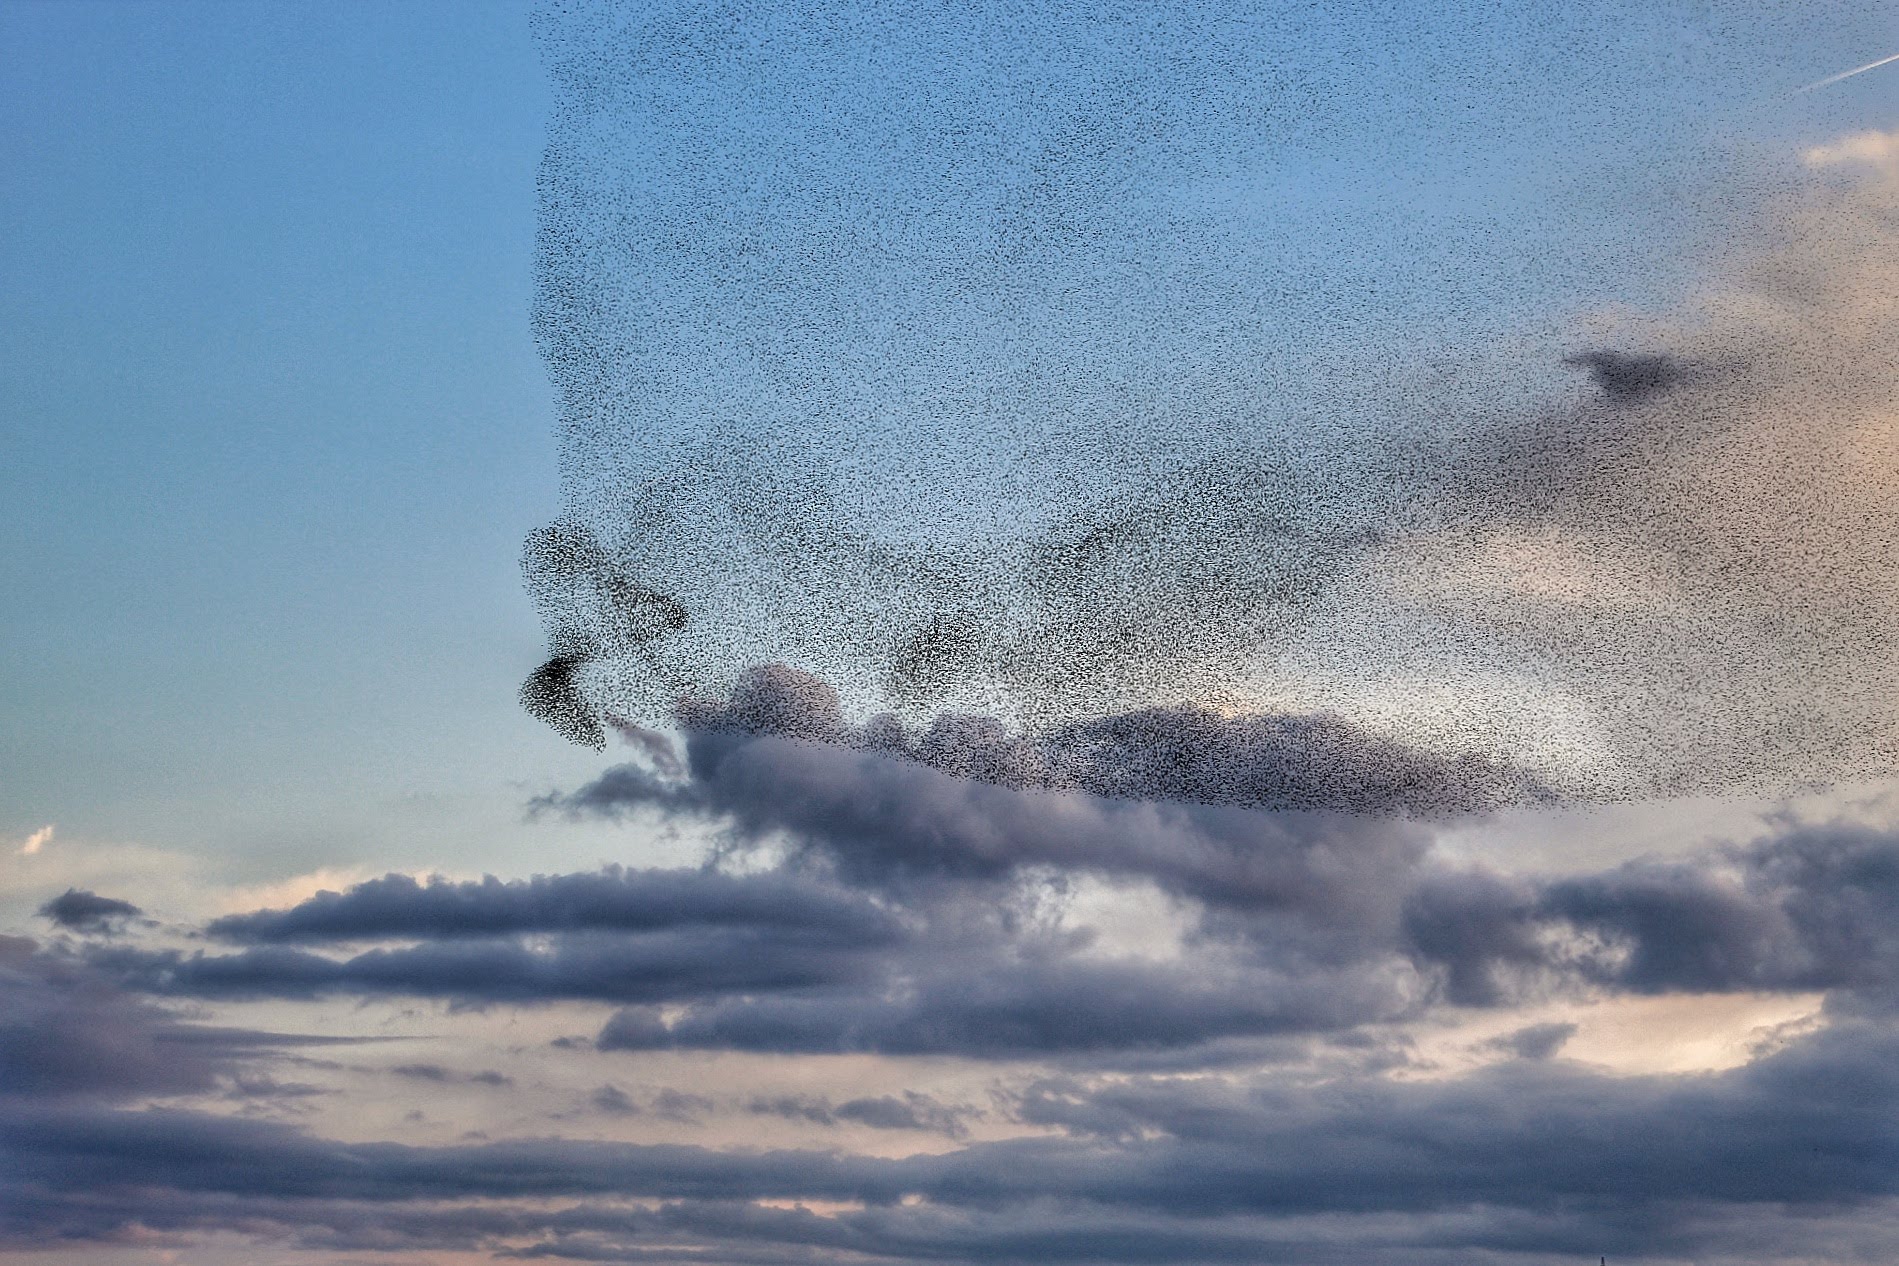 Starlings and clouds...